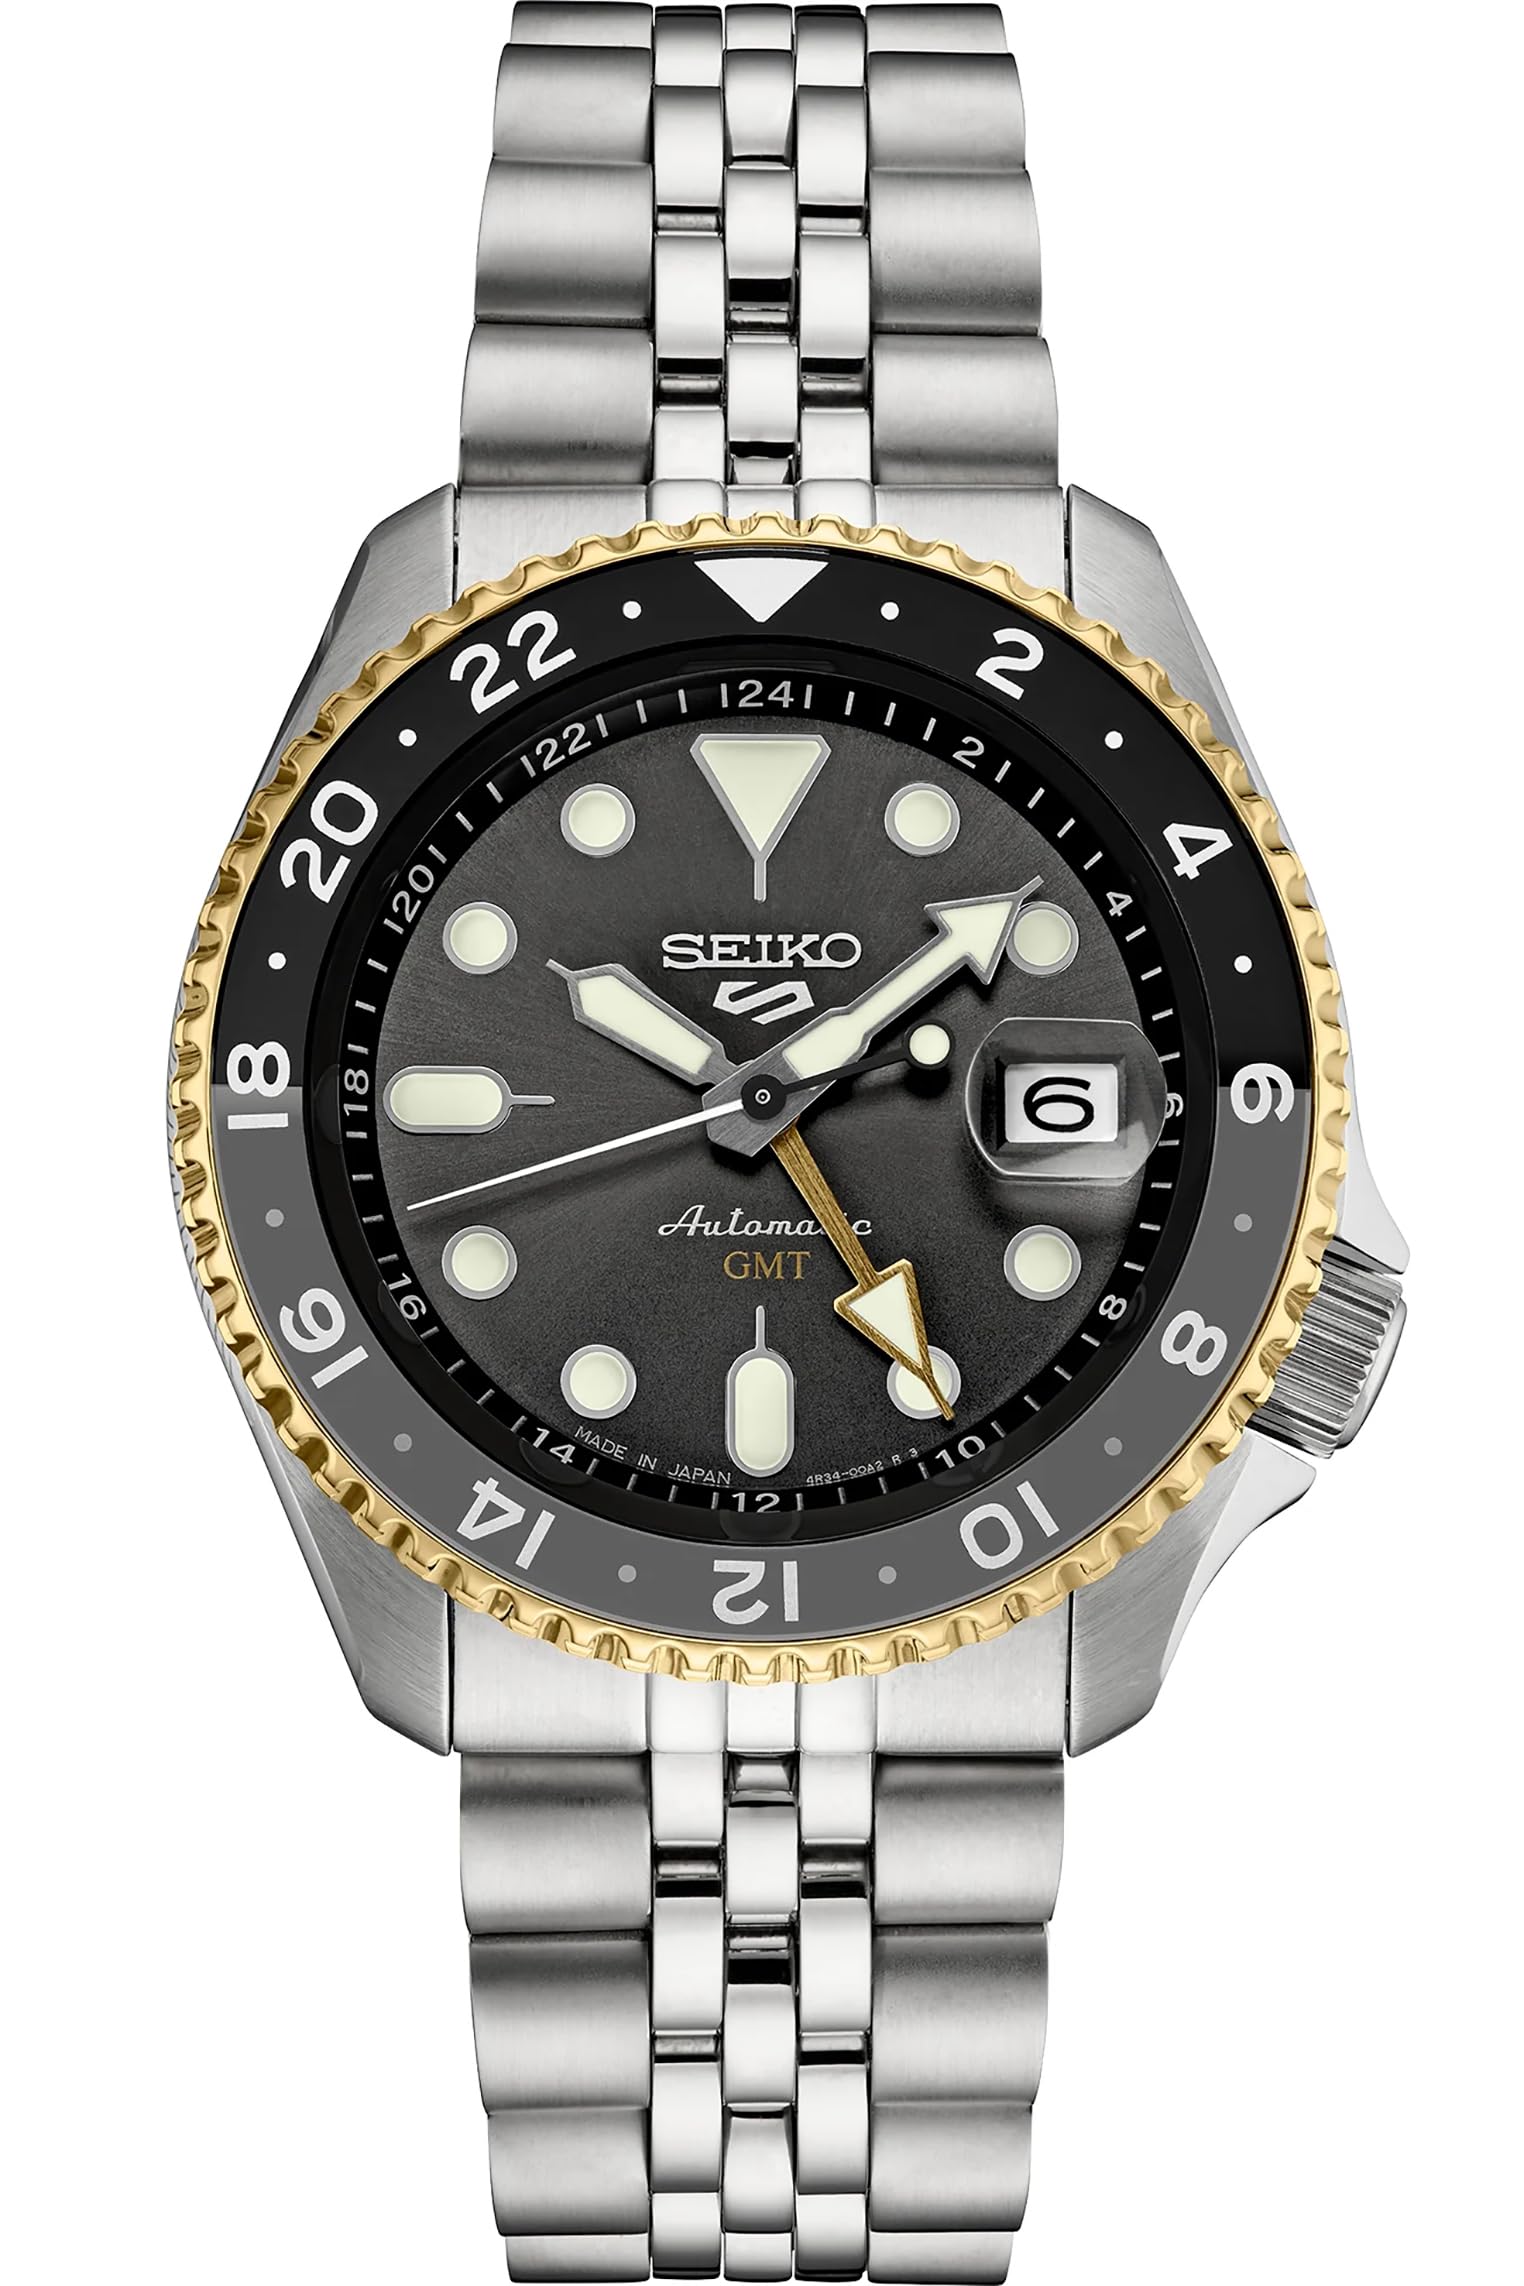 SEIKO SSK021J1,Men Sports,GMT,Mechanical,Automatic,Stainless,Silver Tone,WR,SSK021